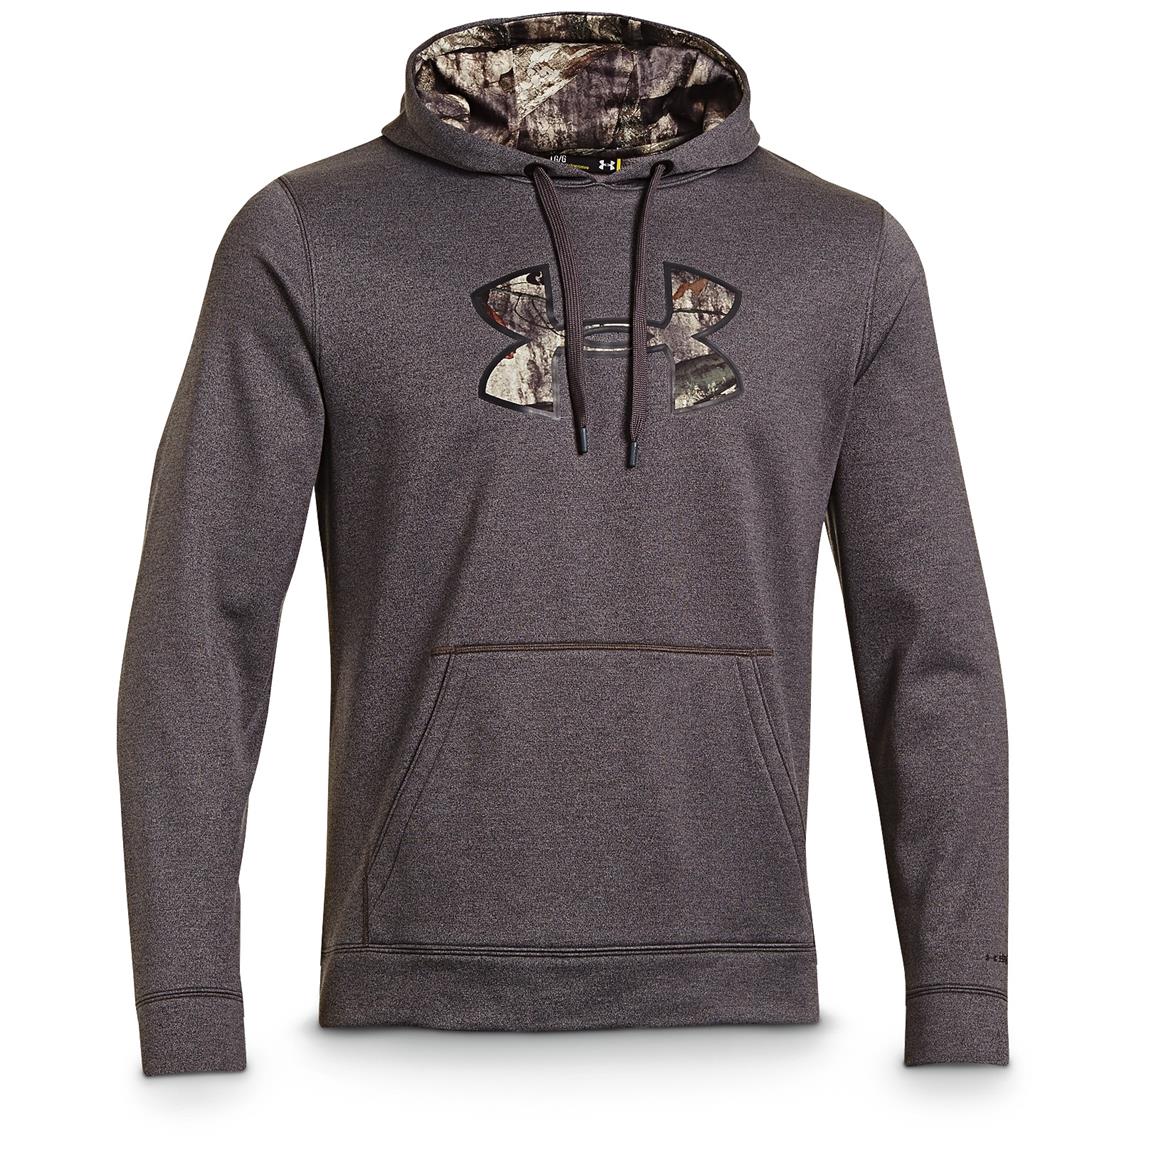 Tall Under Armour Men's Storm Caliber Hoodie - 635822, at Sportsman's Guide